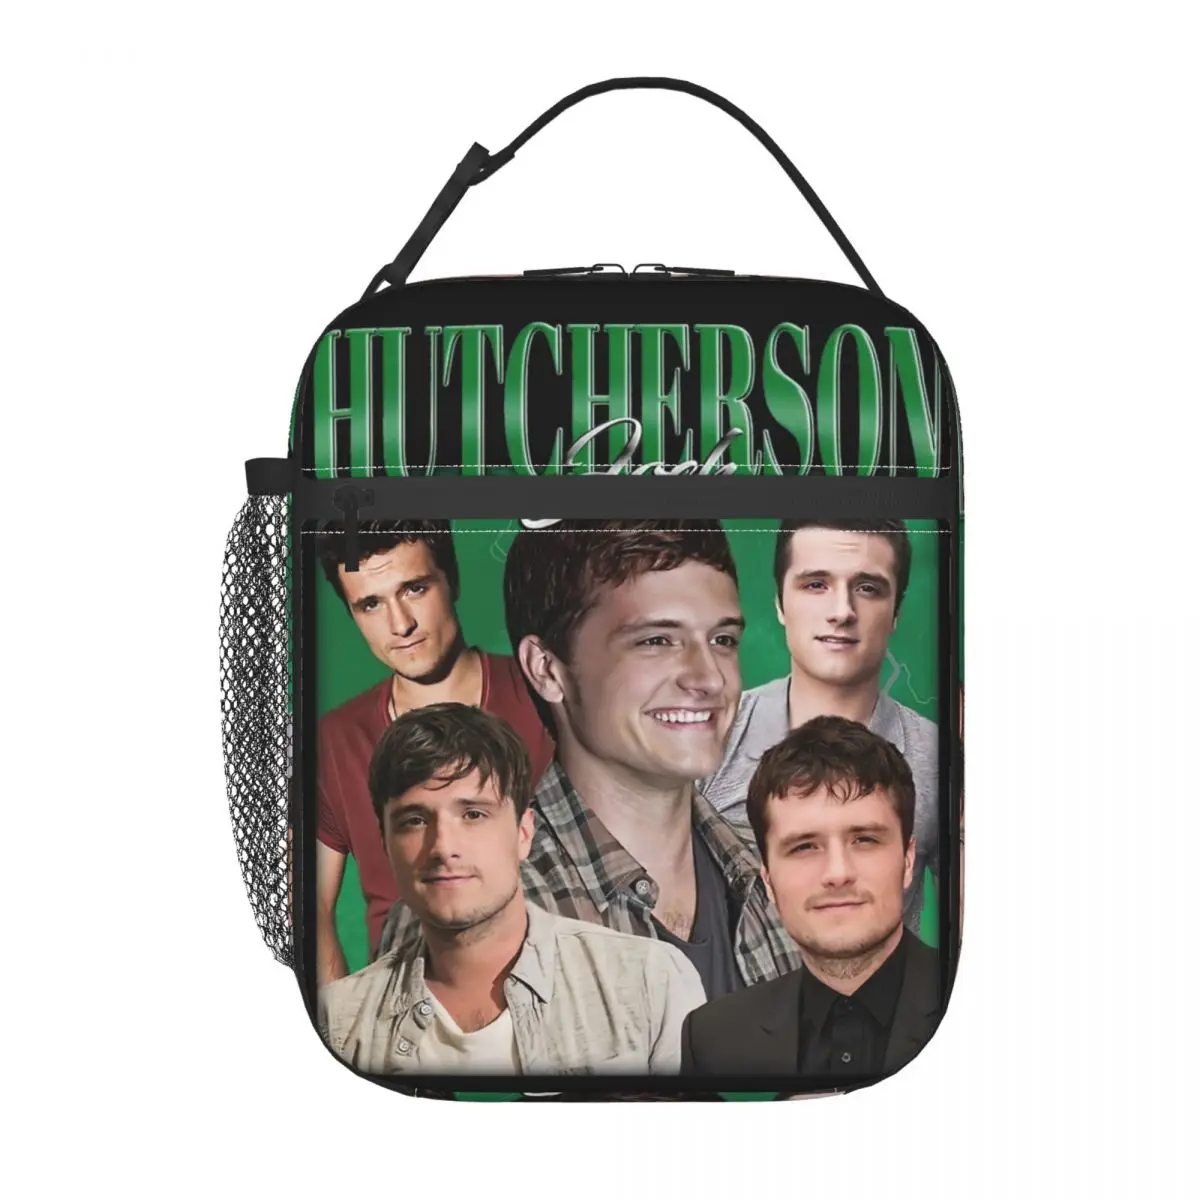 

Vintage Josh Hutcherson Bootleg Insulated Lunch Bag Lunch Container Portable Thermal Cooler Lunch Box School